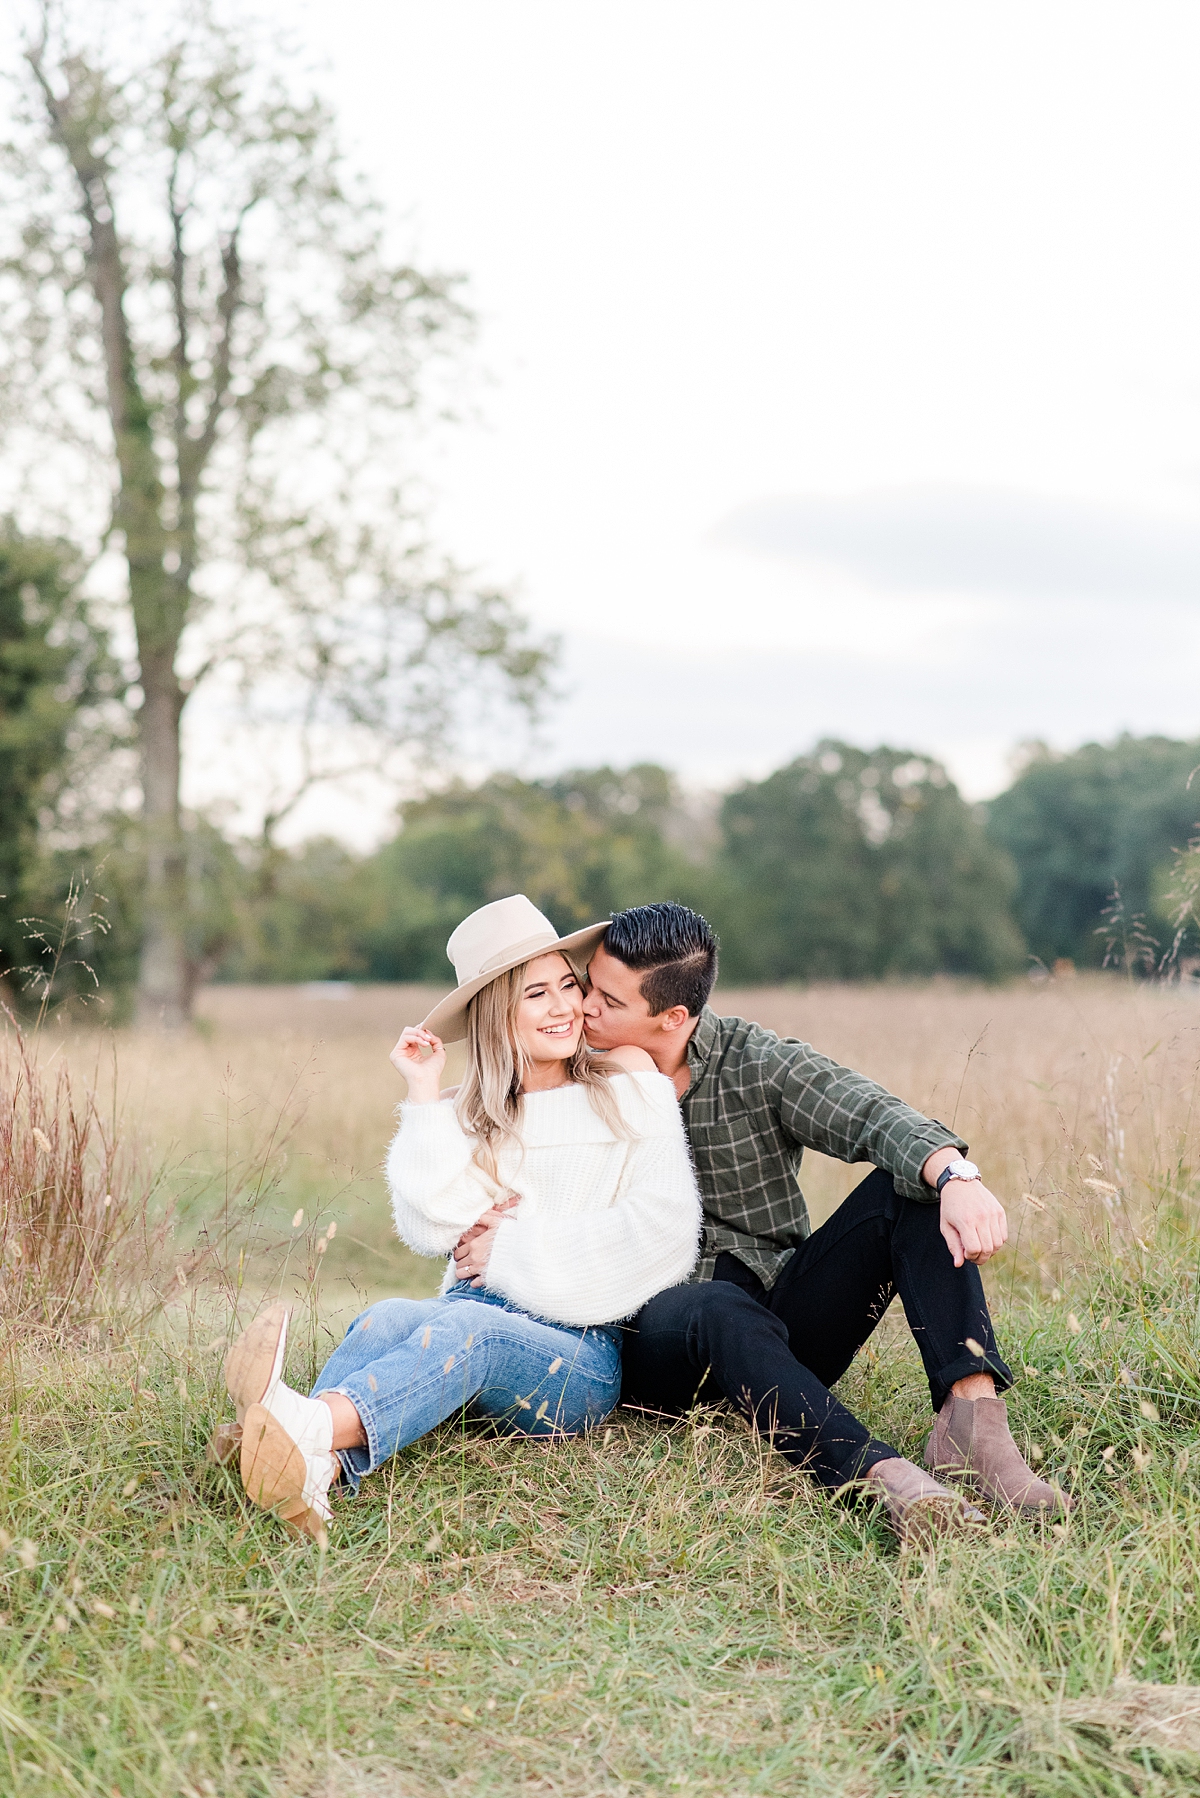 Stylish Engagement Outfit with Hat at Yorktown Battlefield Fall Engagement Session. Engagement Photography by Yorktown Wedding Photographer Kailey Brianne Photography. 